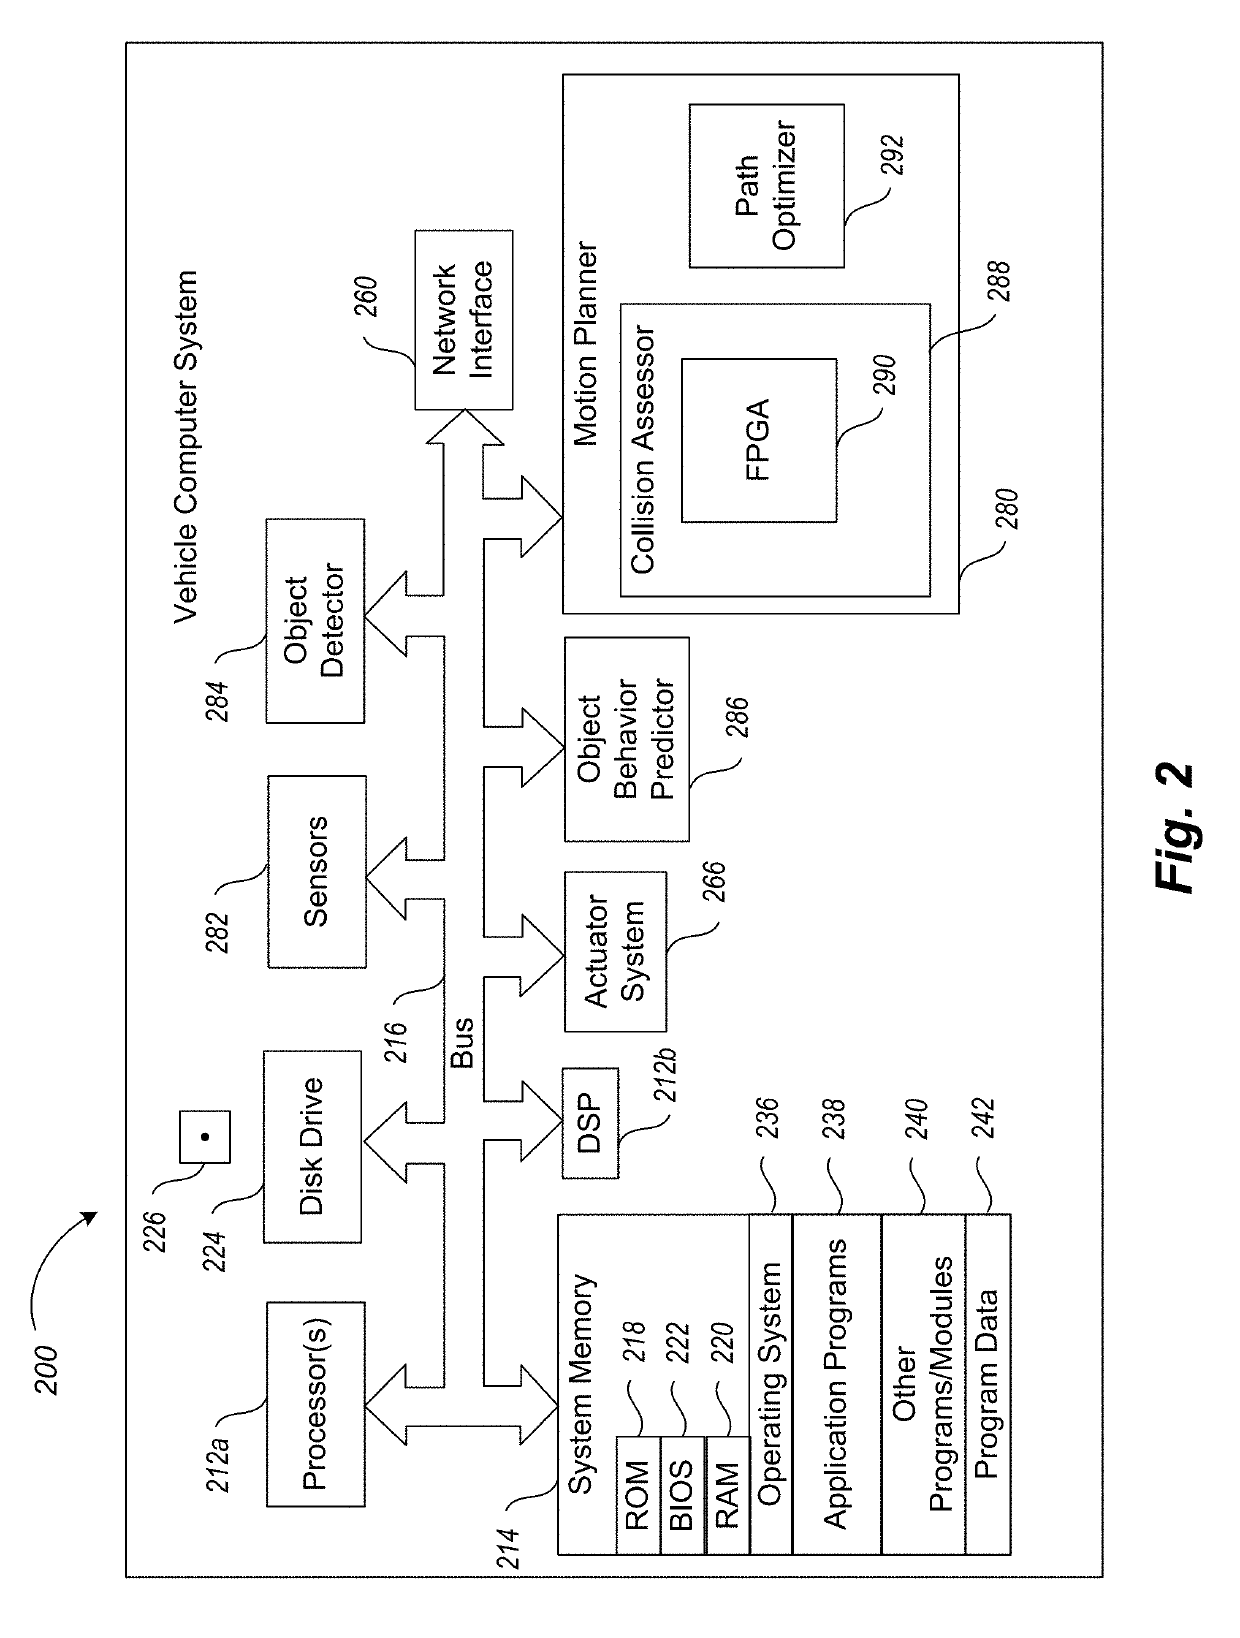 Apparatus, method and article to facilitate motion planning of an autonomous vehicle in an environment having dynamic objects